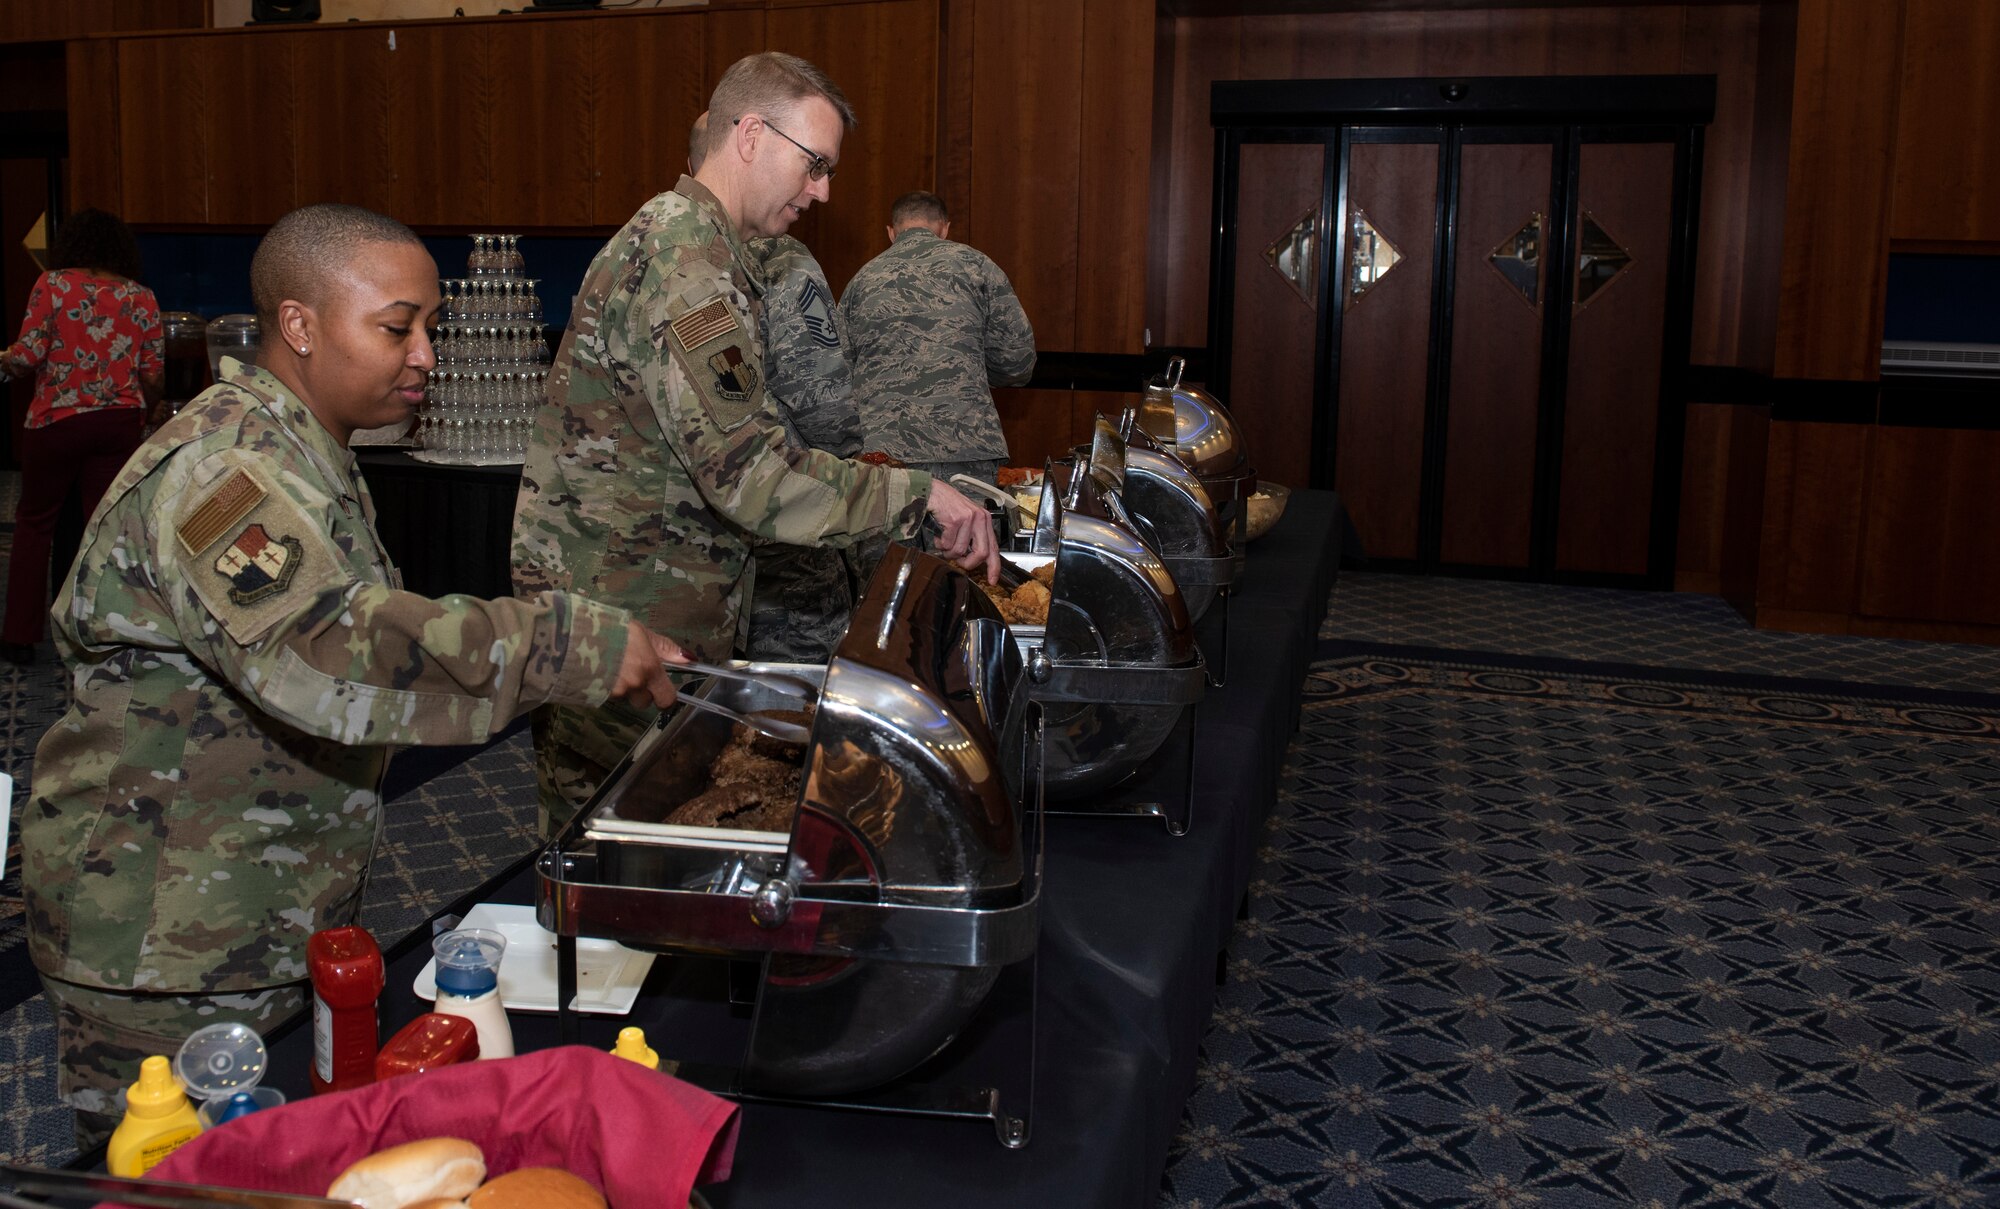 U.S. Air Force Chief Master Sgt. Cheronica Blandburg, 52nd Fighter Wing Munitions Maintenance Group superintendent and U.S. Air Force Col. Greg Buckner, 52nd FW MMG commander, serve themselves food during the Black History Month Luncheon at Spangdahlem Air Base, Germany, Feb. 24, 2020. During the luncheon participants viewed a short video featuring African-American icons and abolitionists. (U.S. Air Force photo by Airman 1st Class Alison Stewart)